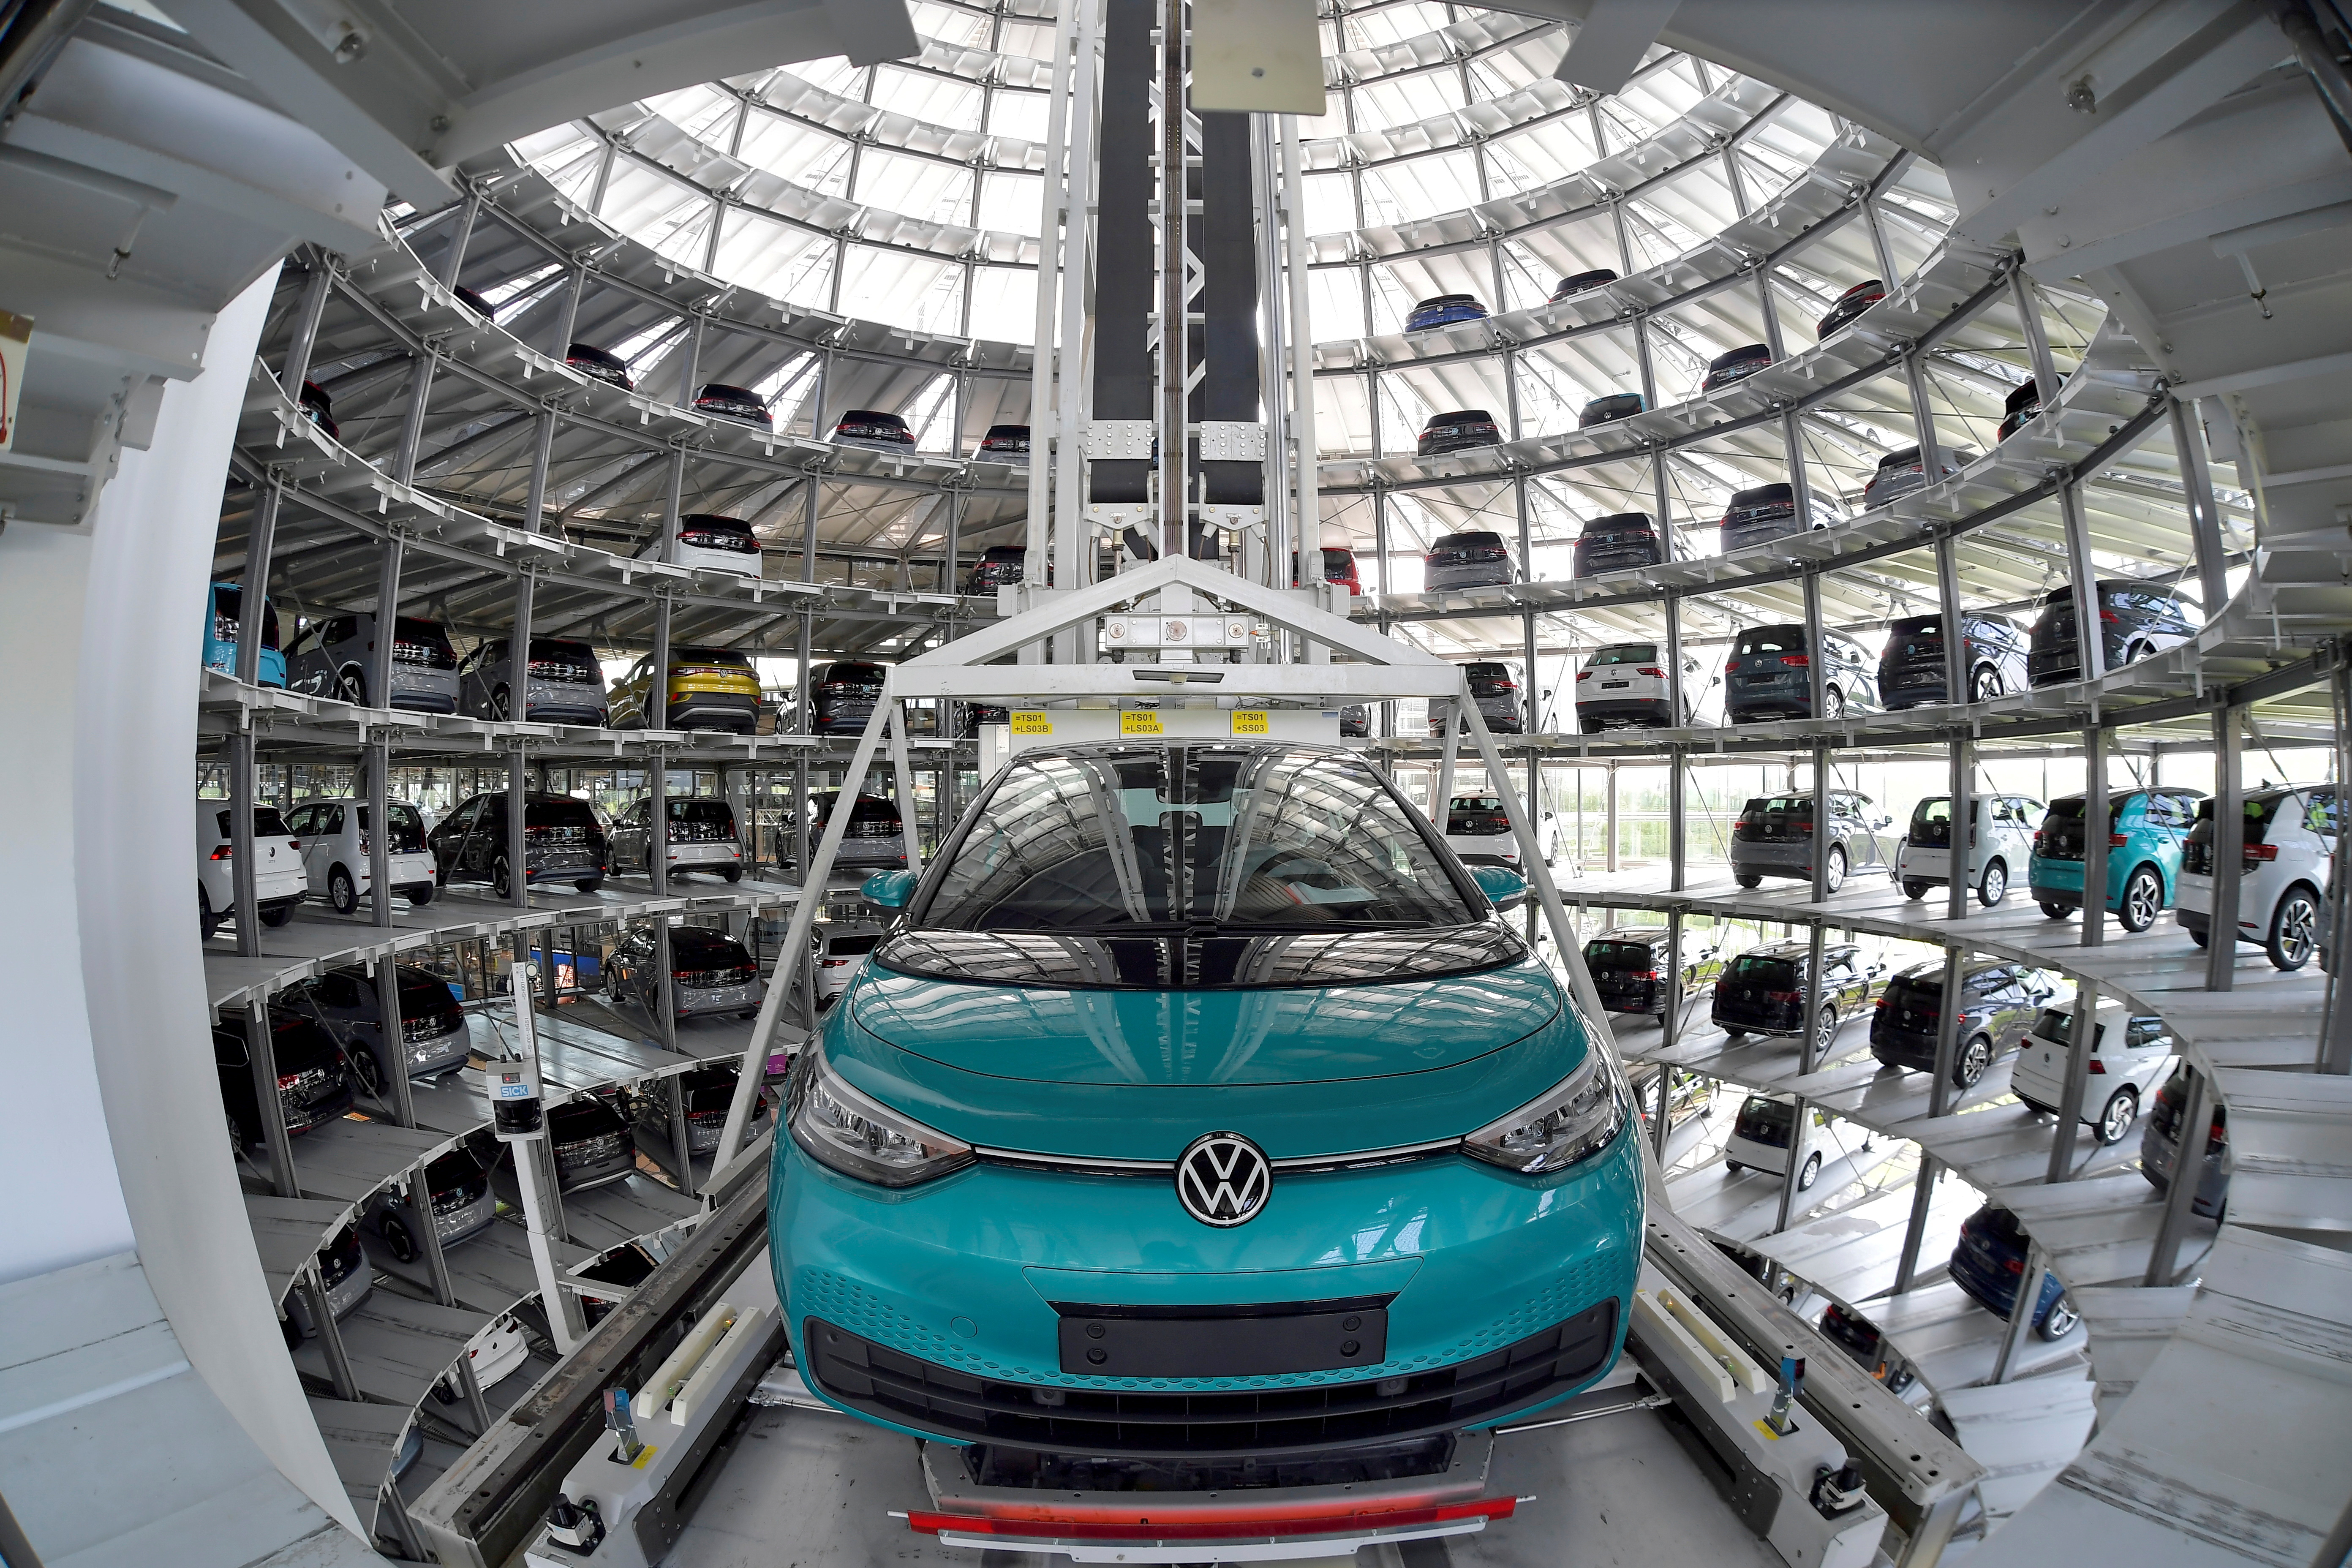 View of the depot tower of German carmaker Volkswagen's electric ID.3 car in Dresden, Germany, June 8, 2021. Picture taken with a fish eye lens. REUTERS/Matthias Rietschel/File Photo